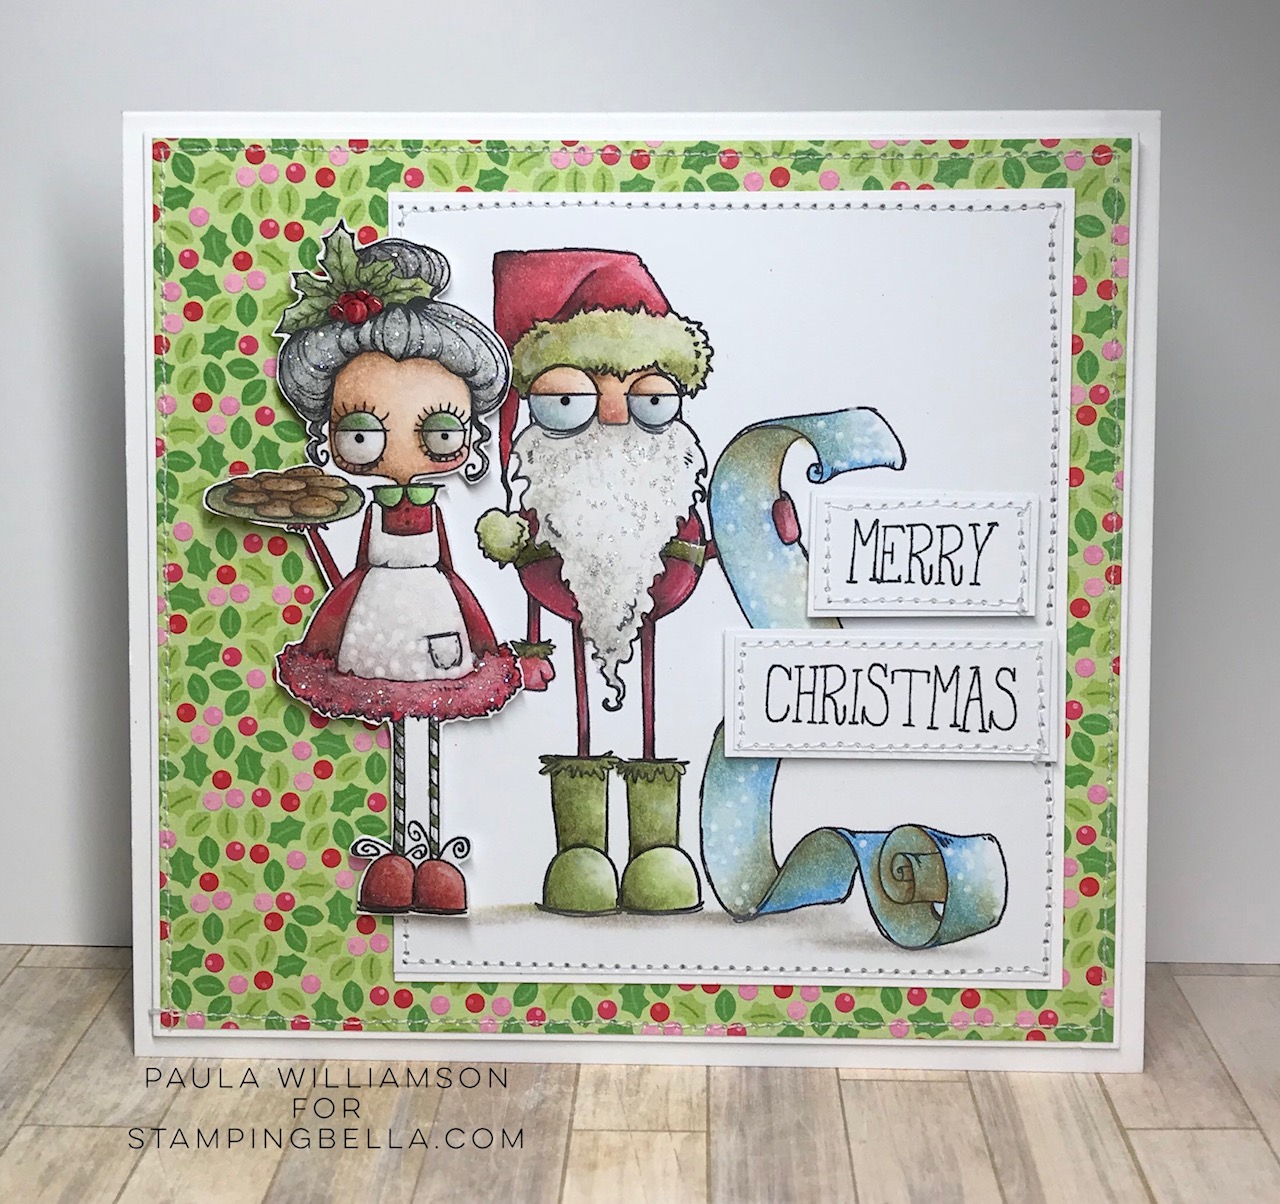 www.stampingbella.com: RUBBER STAMP USED: ODDBALL SANTA AND THE MISSUS card by PAULA WILLIAMSON